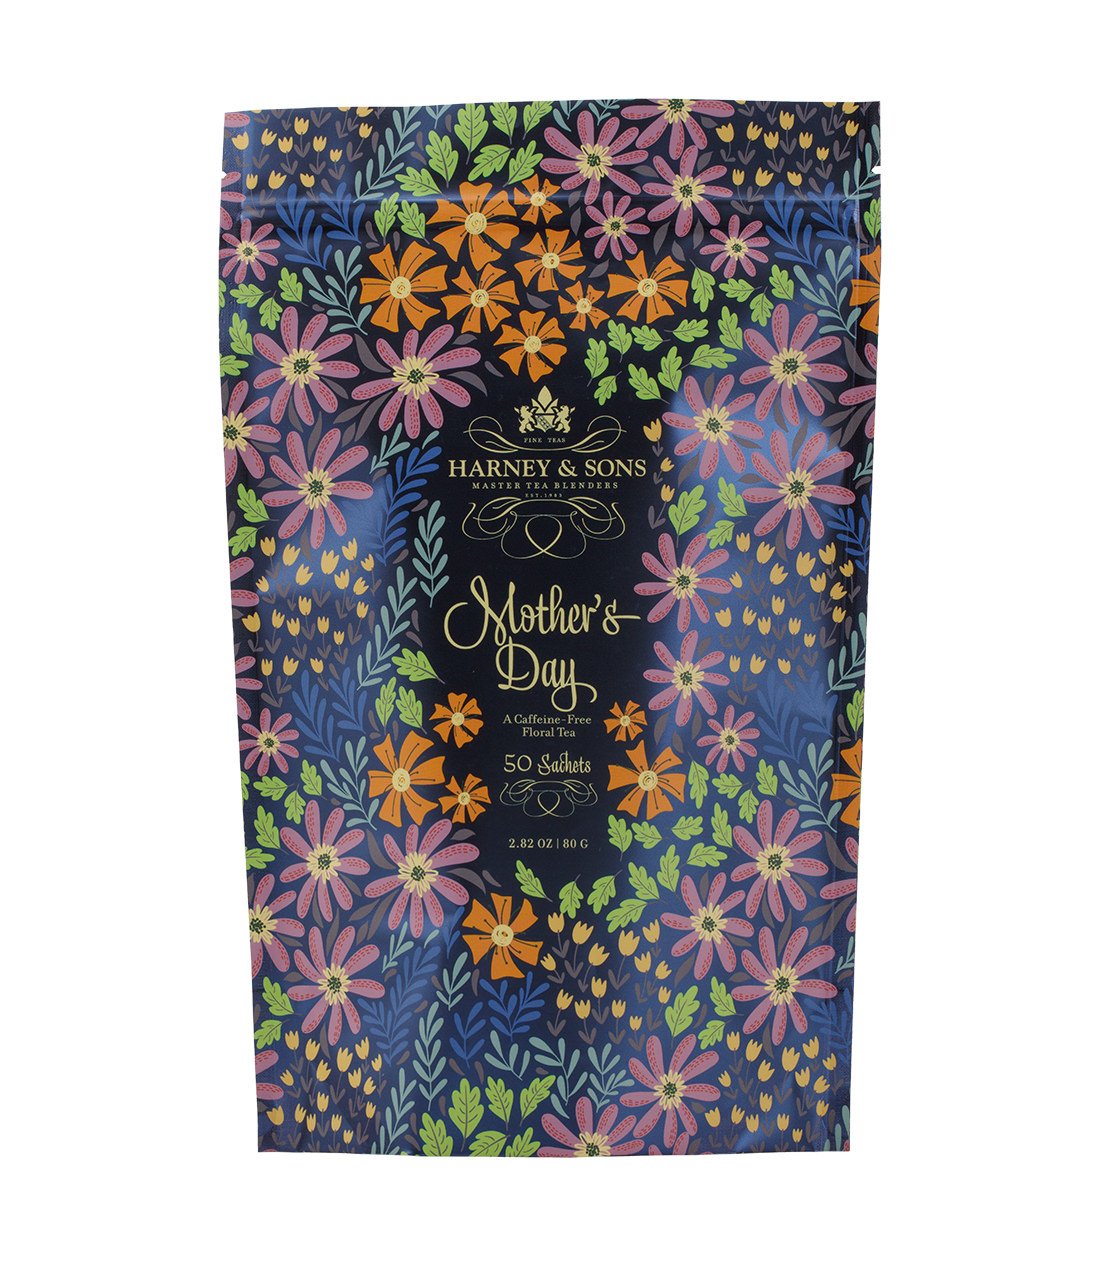 Mother's Day, Bag of 50 Sachets -   - Harney & Sons Fine Teas